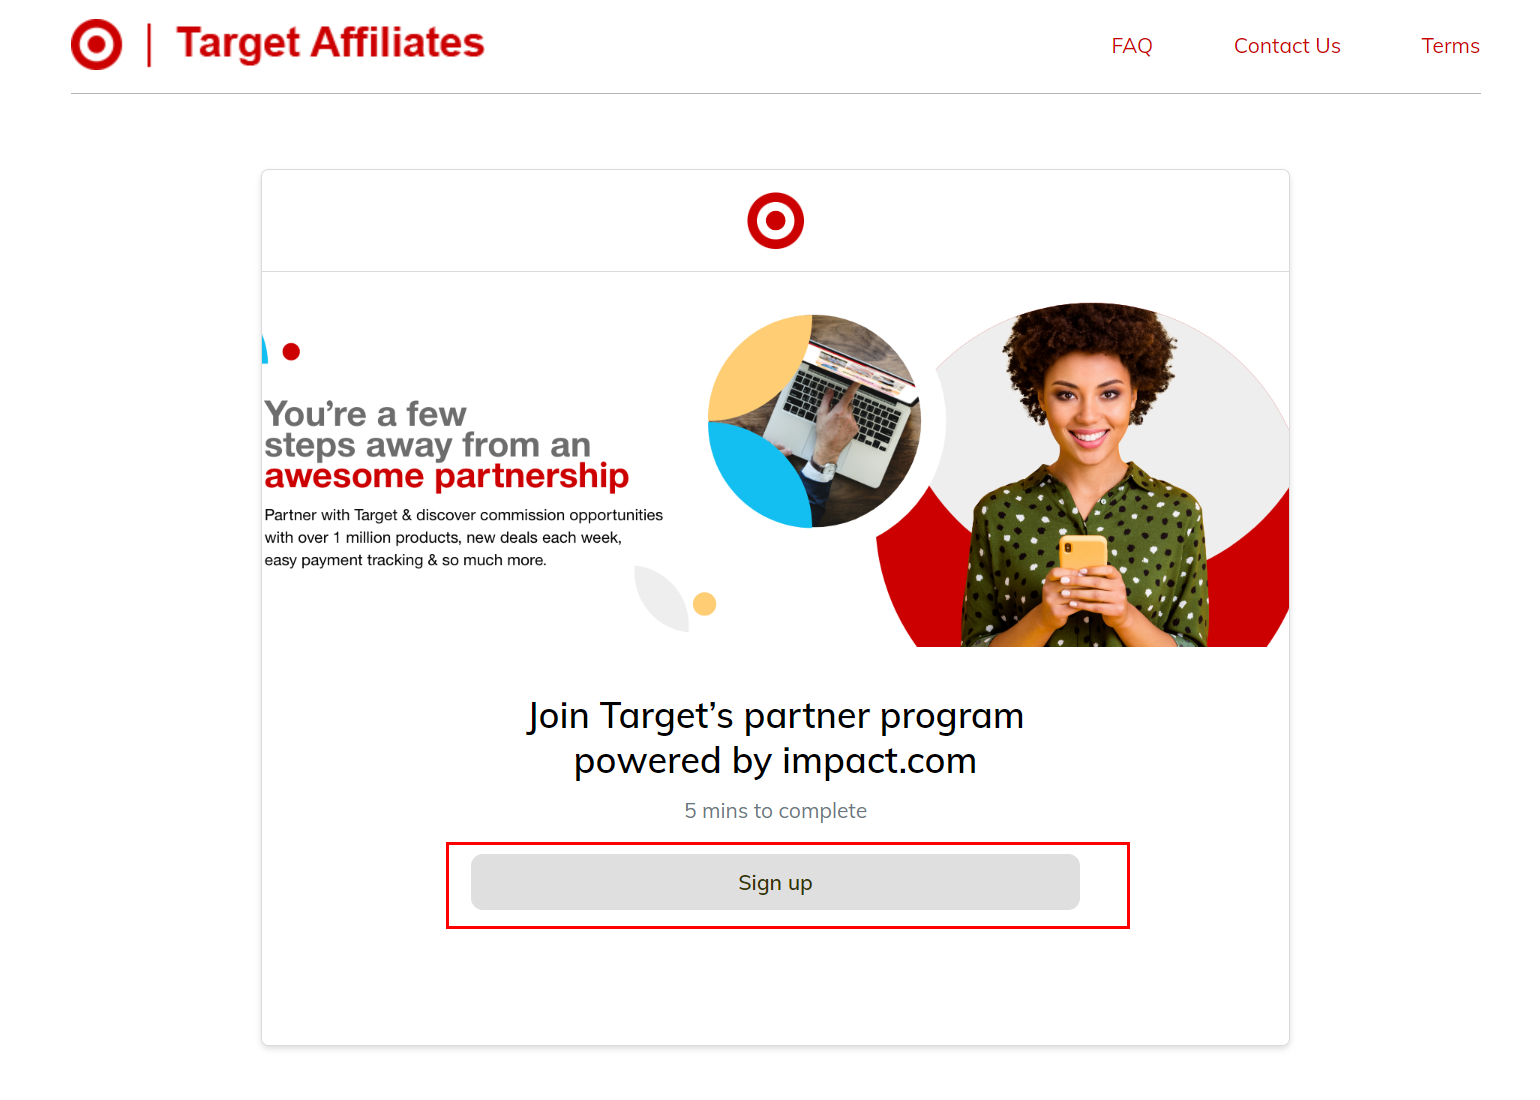 Target sign up for initiating account creation